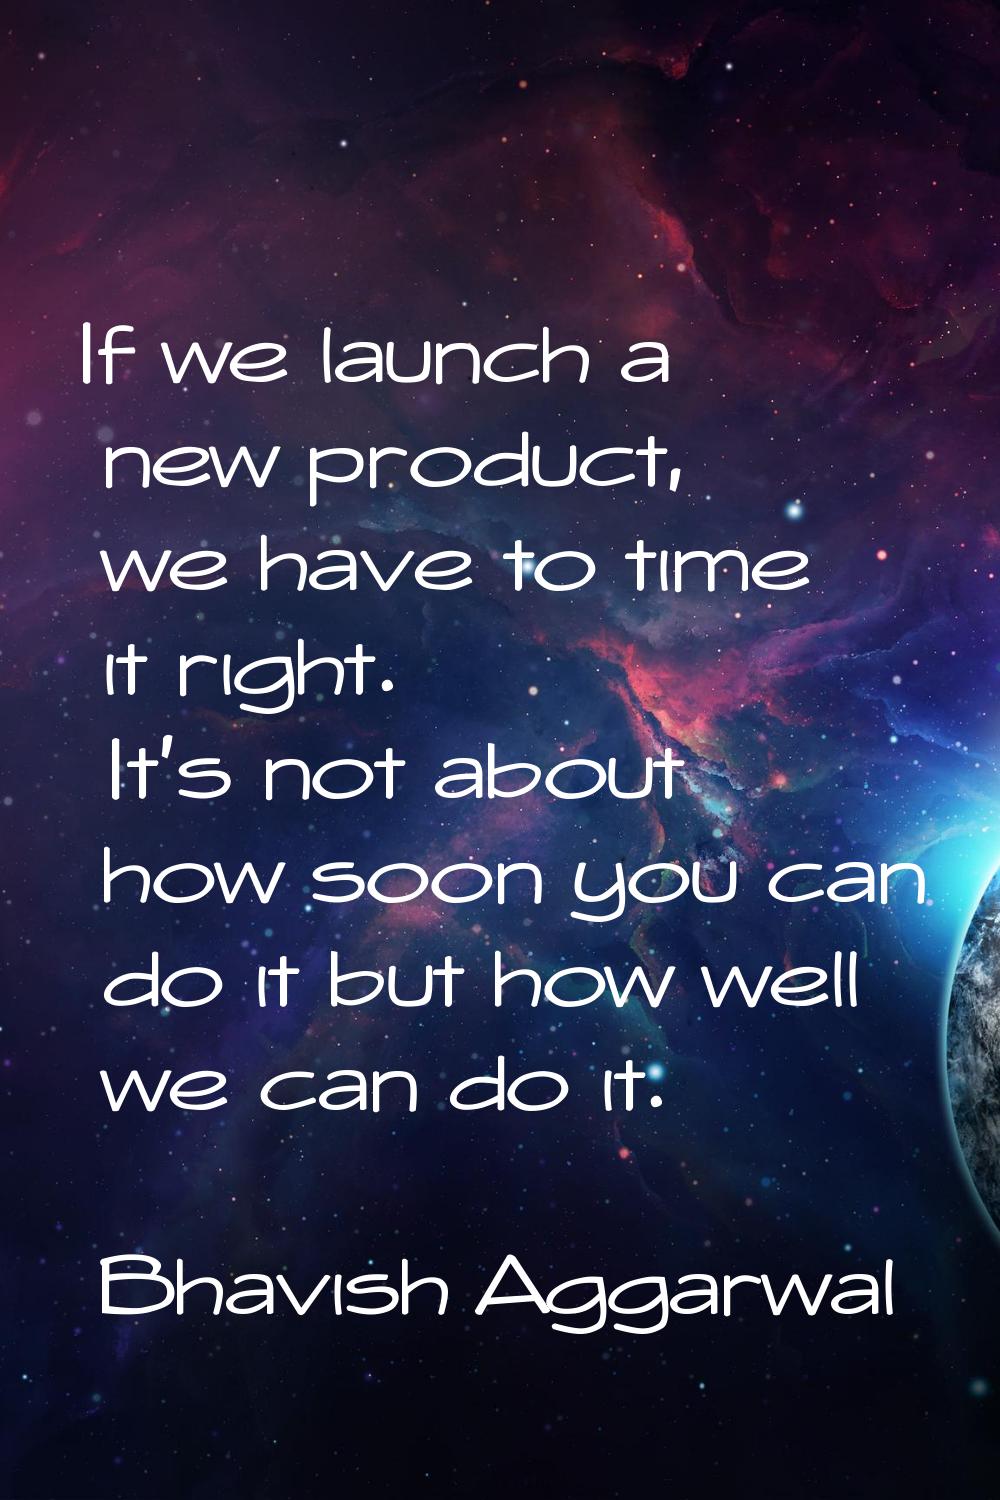 If we launch a new product, we have to time it right. It's not about how soon you can do it but how